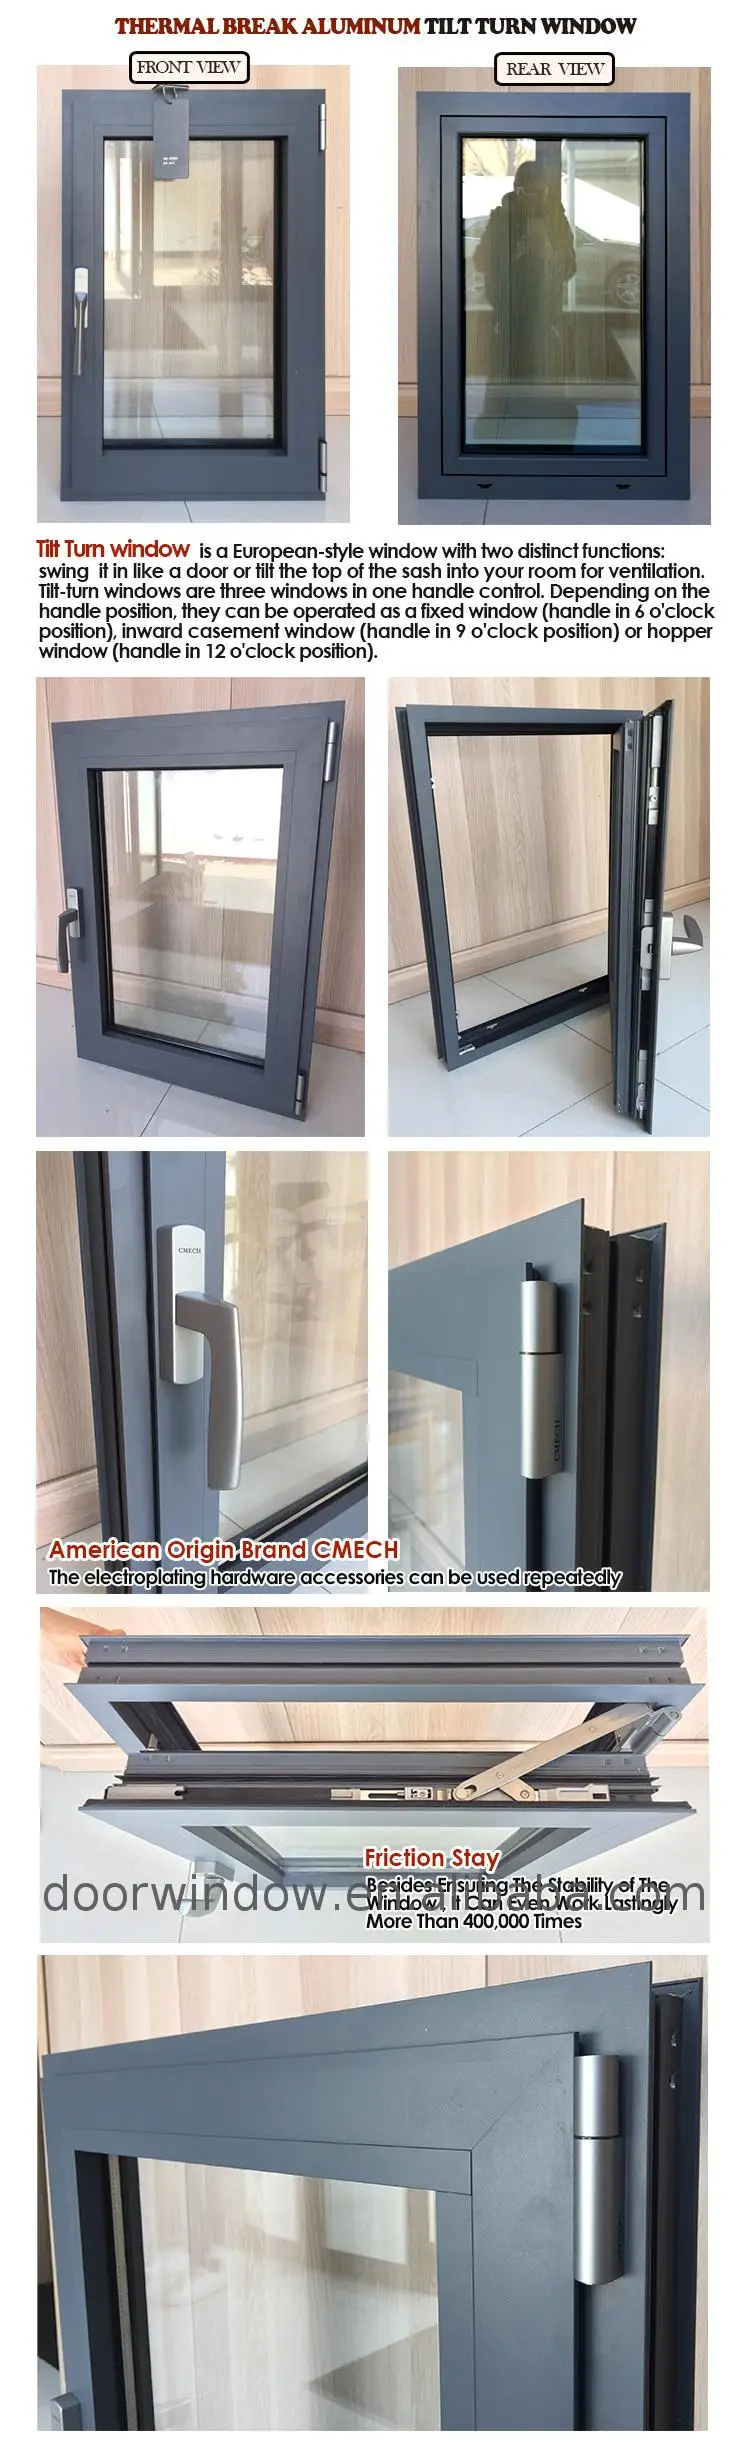 Most selling items color-backed glazing swing window glass coated